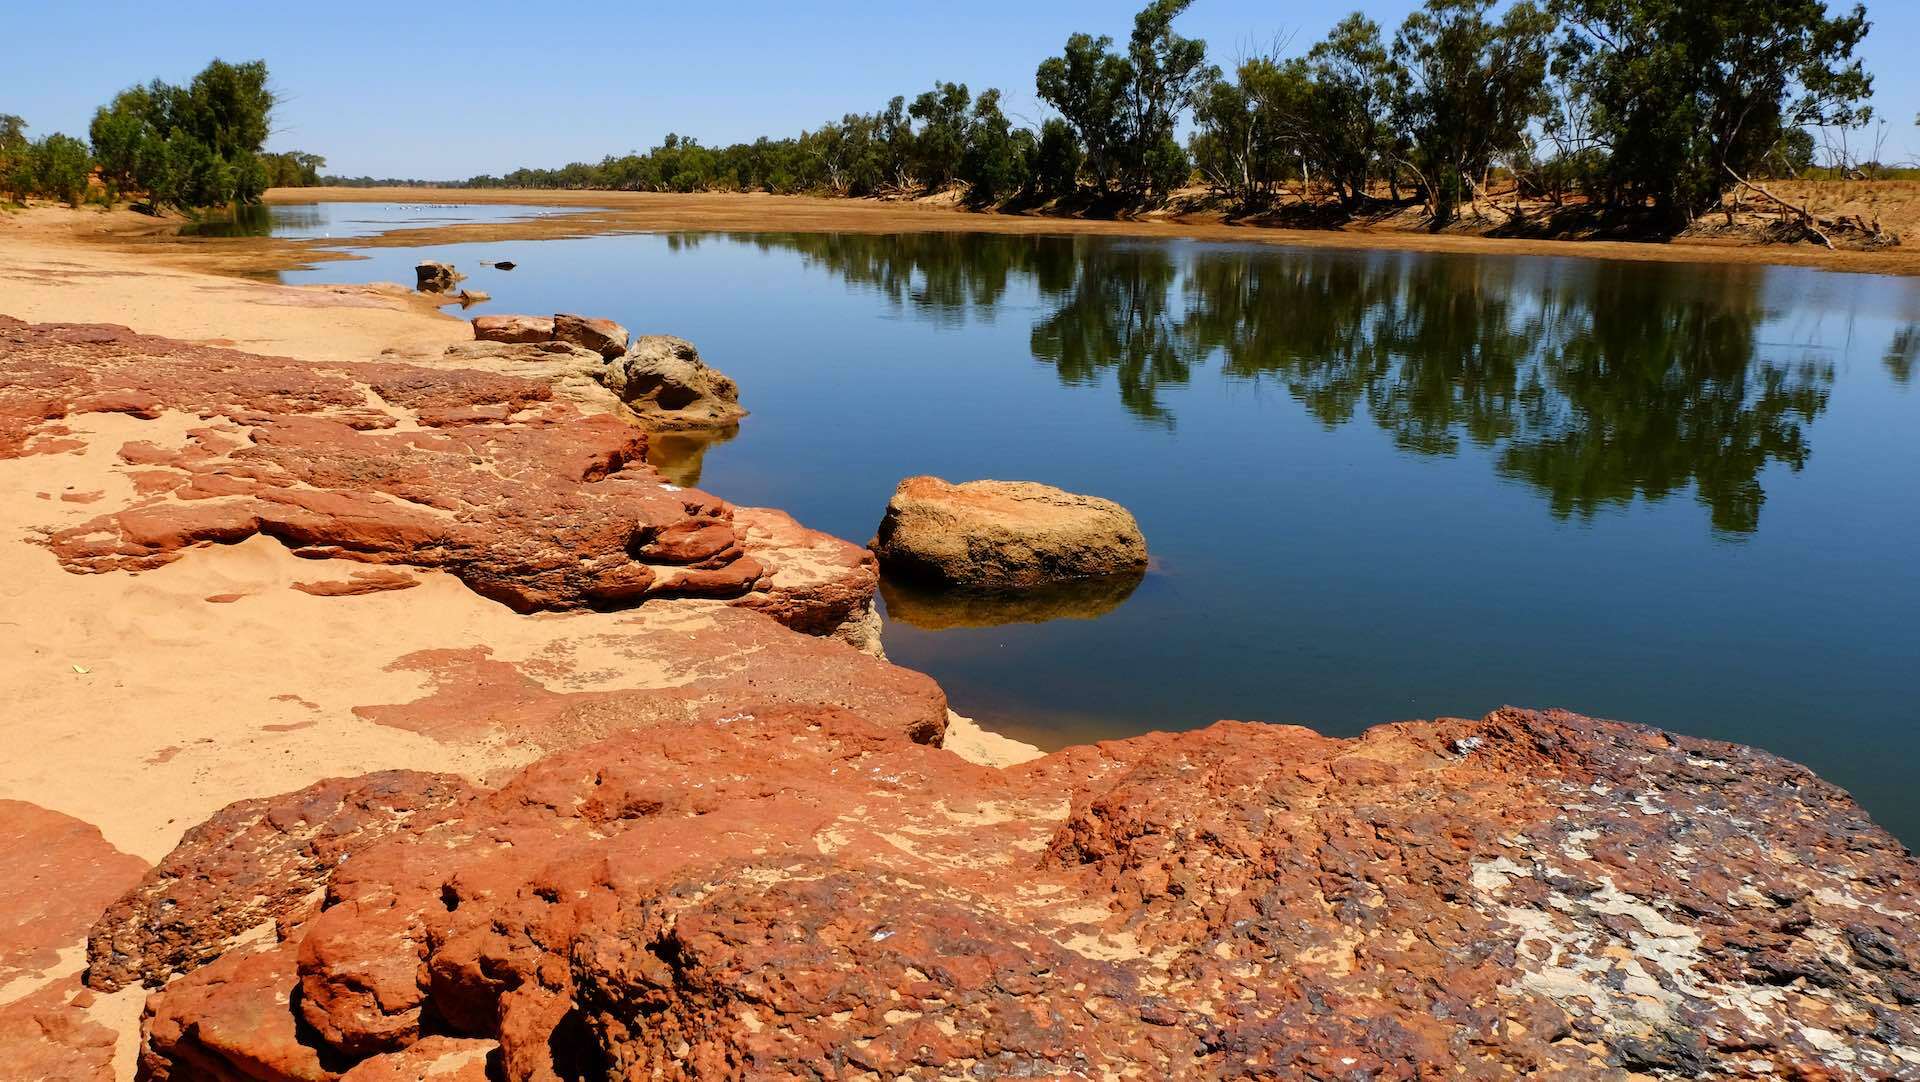 Kingsford Smith Mail Run - A Five Day Road Trip in Outback WA, Jane Pulsey